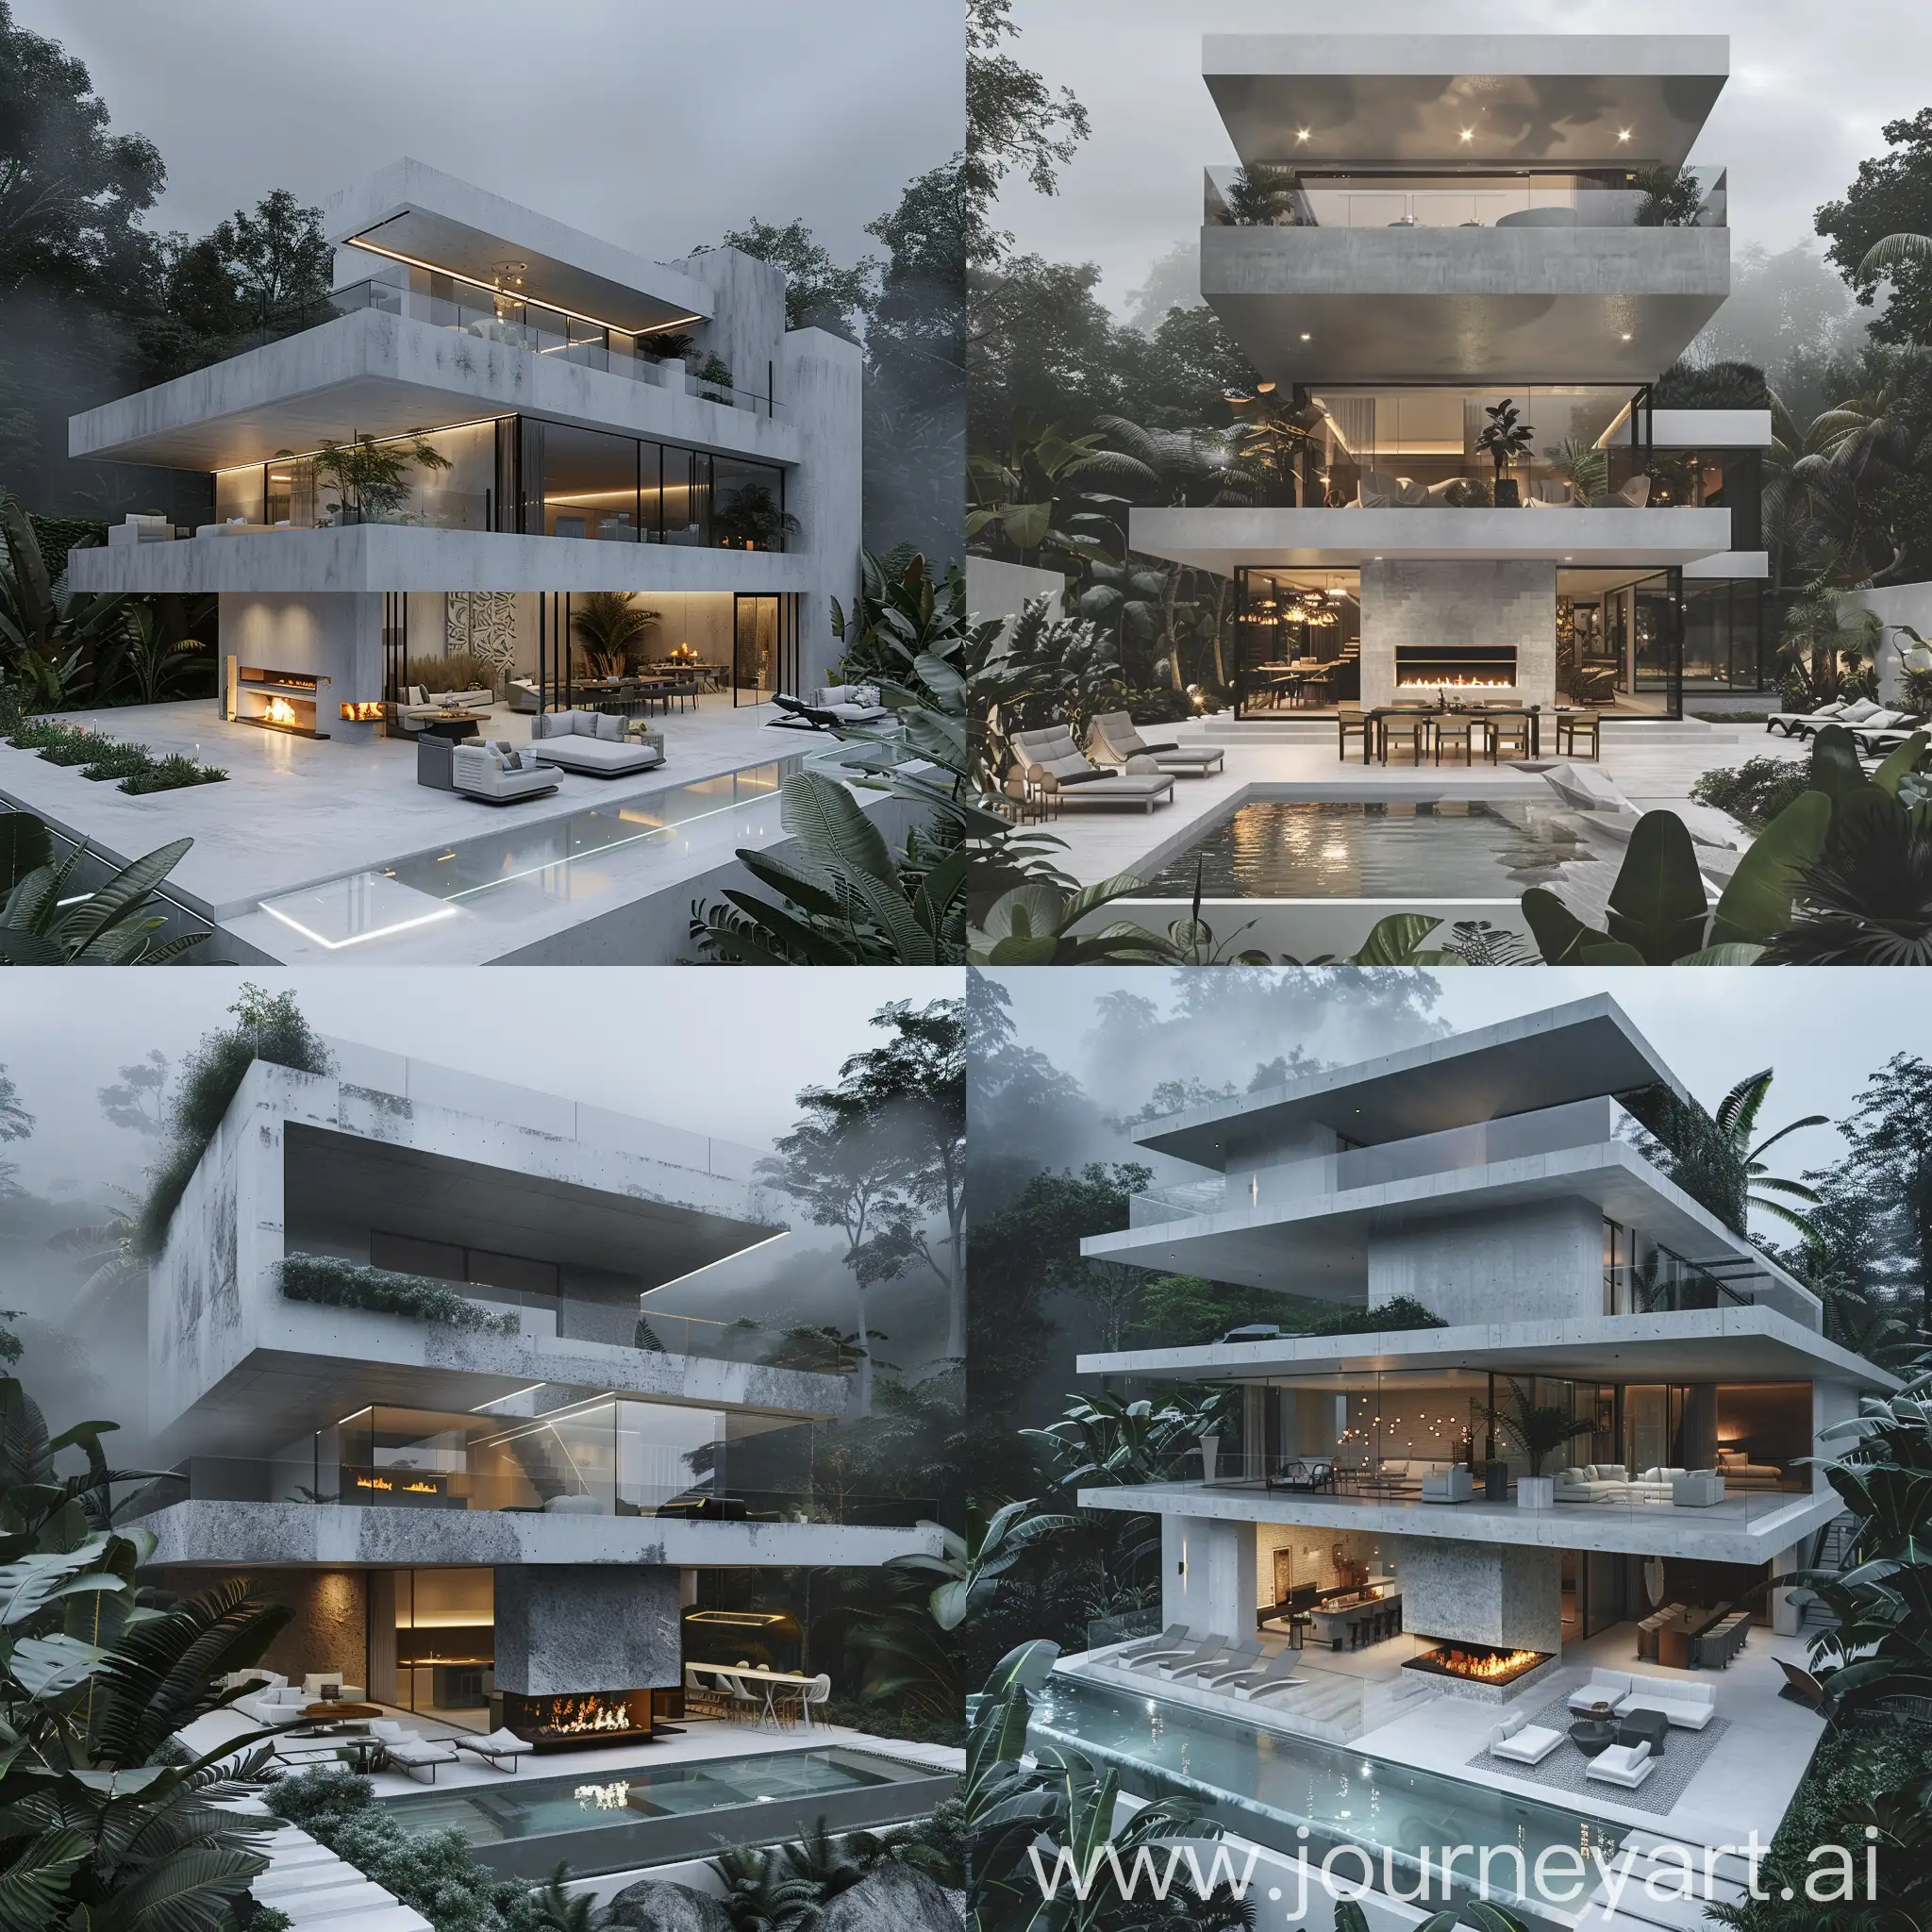 A modern three-story villa with white and gray colors and concrete, with full arrangement of furniture.
 with an infinity glass pool, decorated and soft lighting, fireplace and table and chairs, landscaped yard,
 In a lush tropical forest with broad leaves, foggy cloudy weather, real photo.